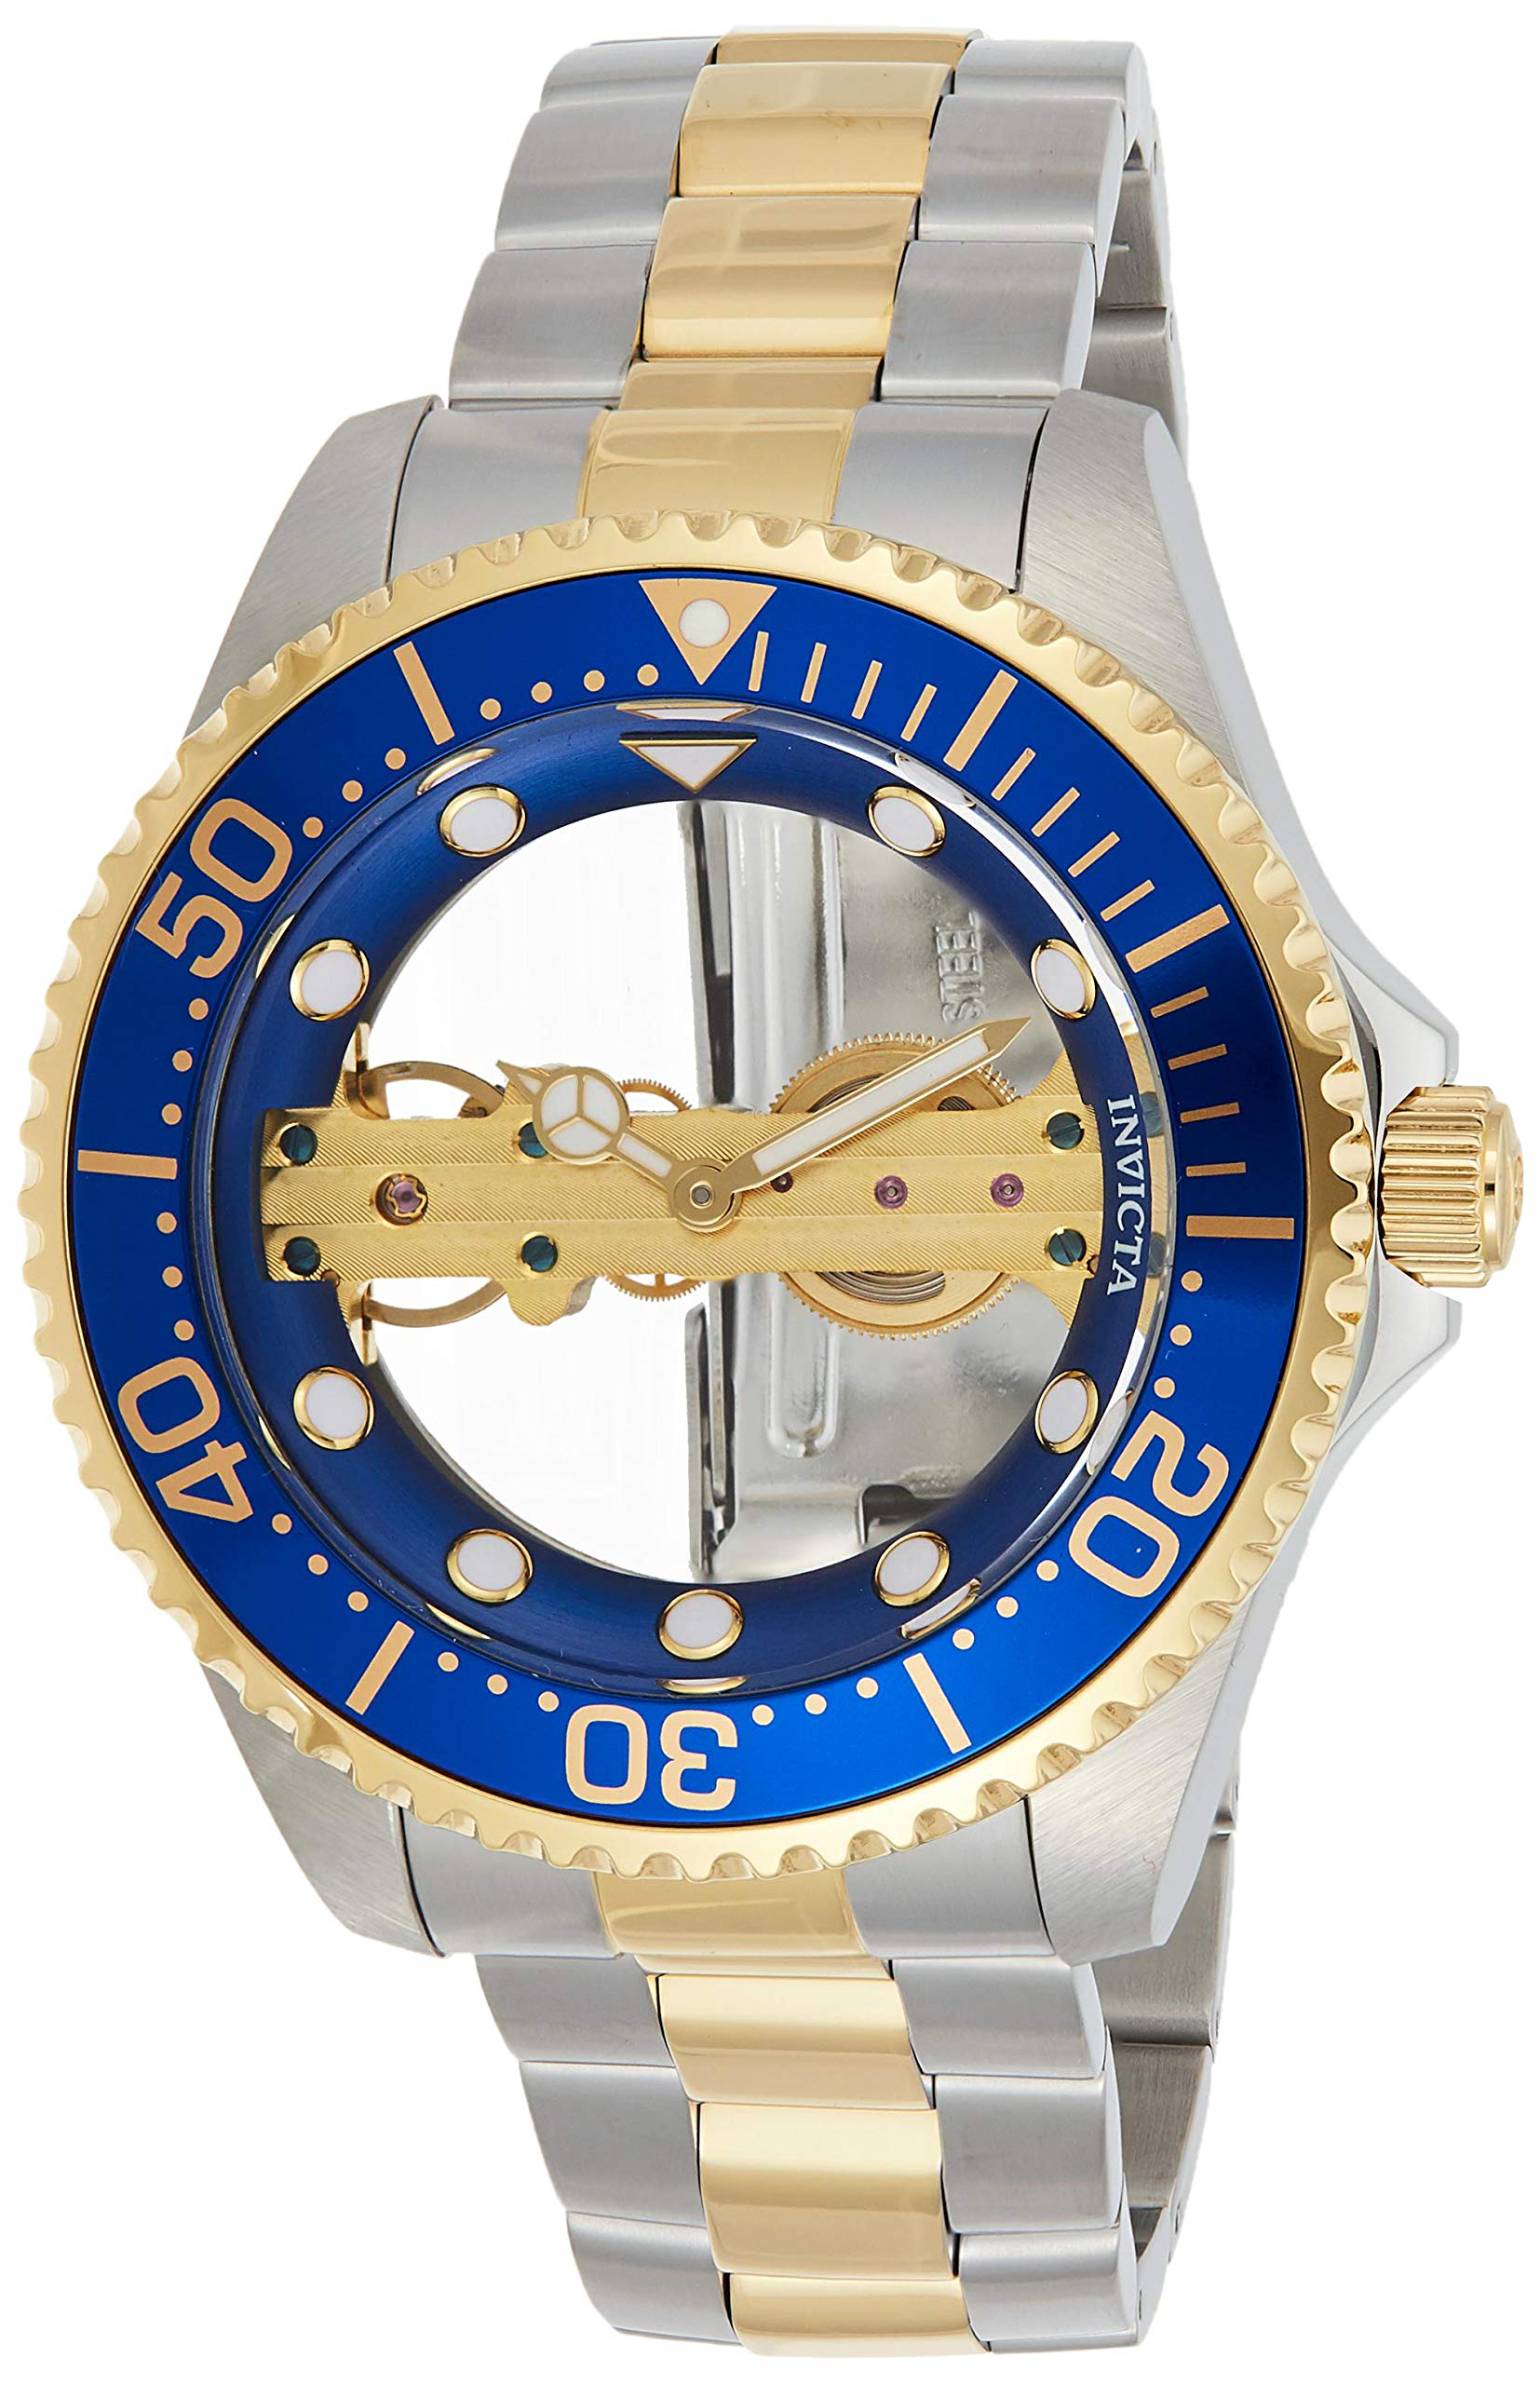 Invicta Men's Pro Diver Stainless Steel Mechanical-Hand-Wind Watch with Stainless-Steel Strap, Two Tone, 22 (Model: 26243)